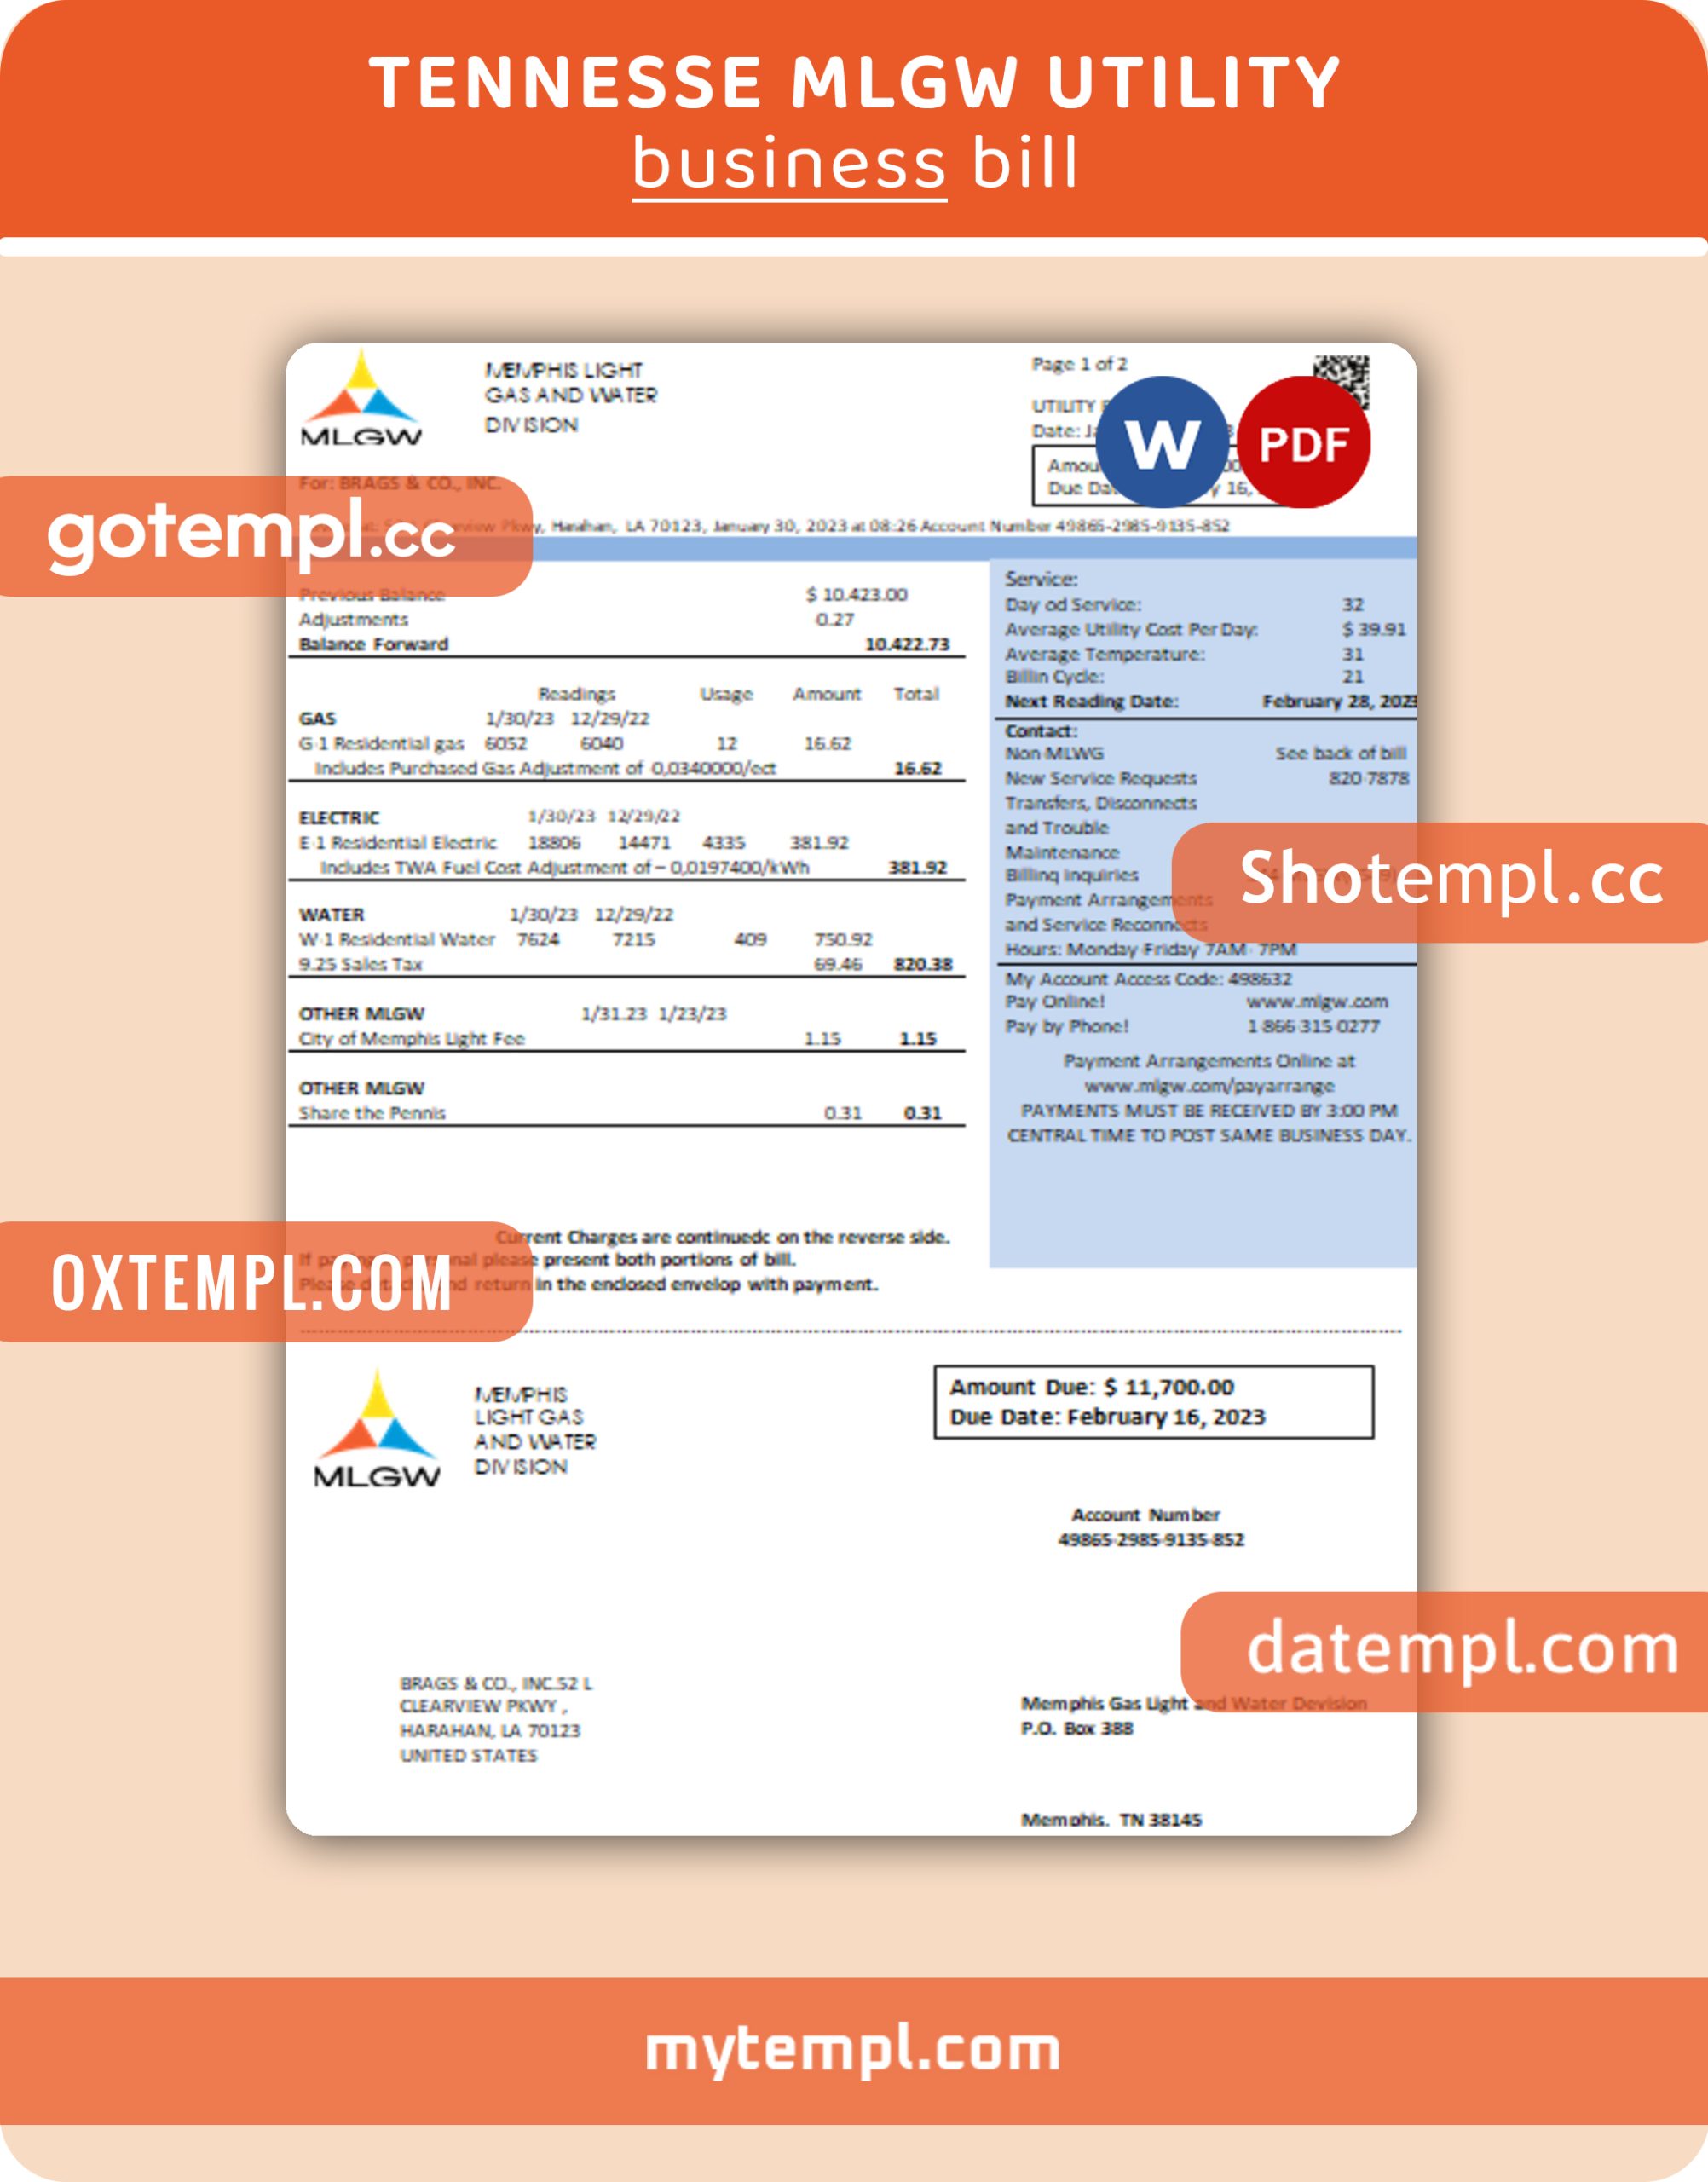 INDIA INTEGRON managed solutions Pvt.Ltd pay stub template in Word and PDF formats